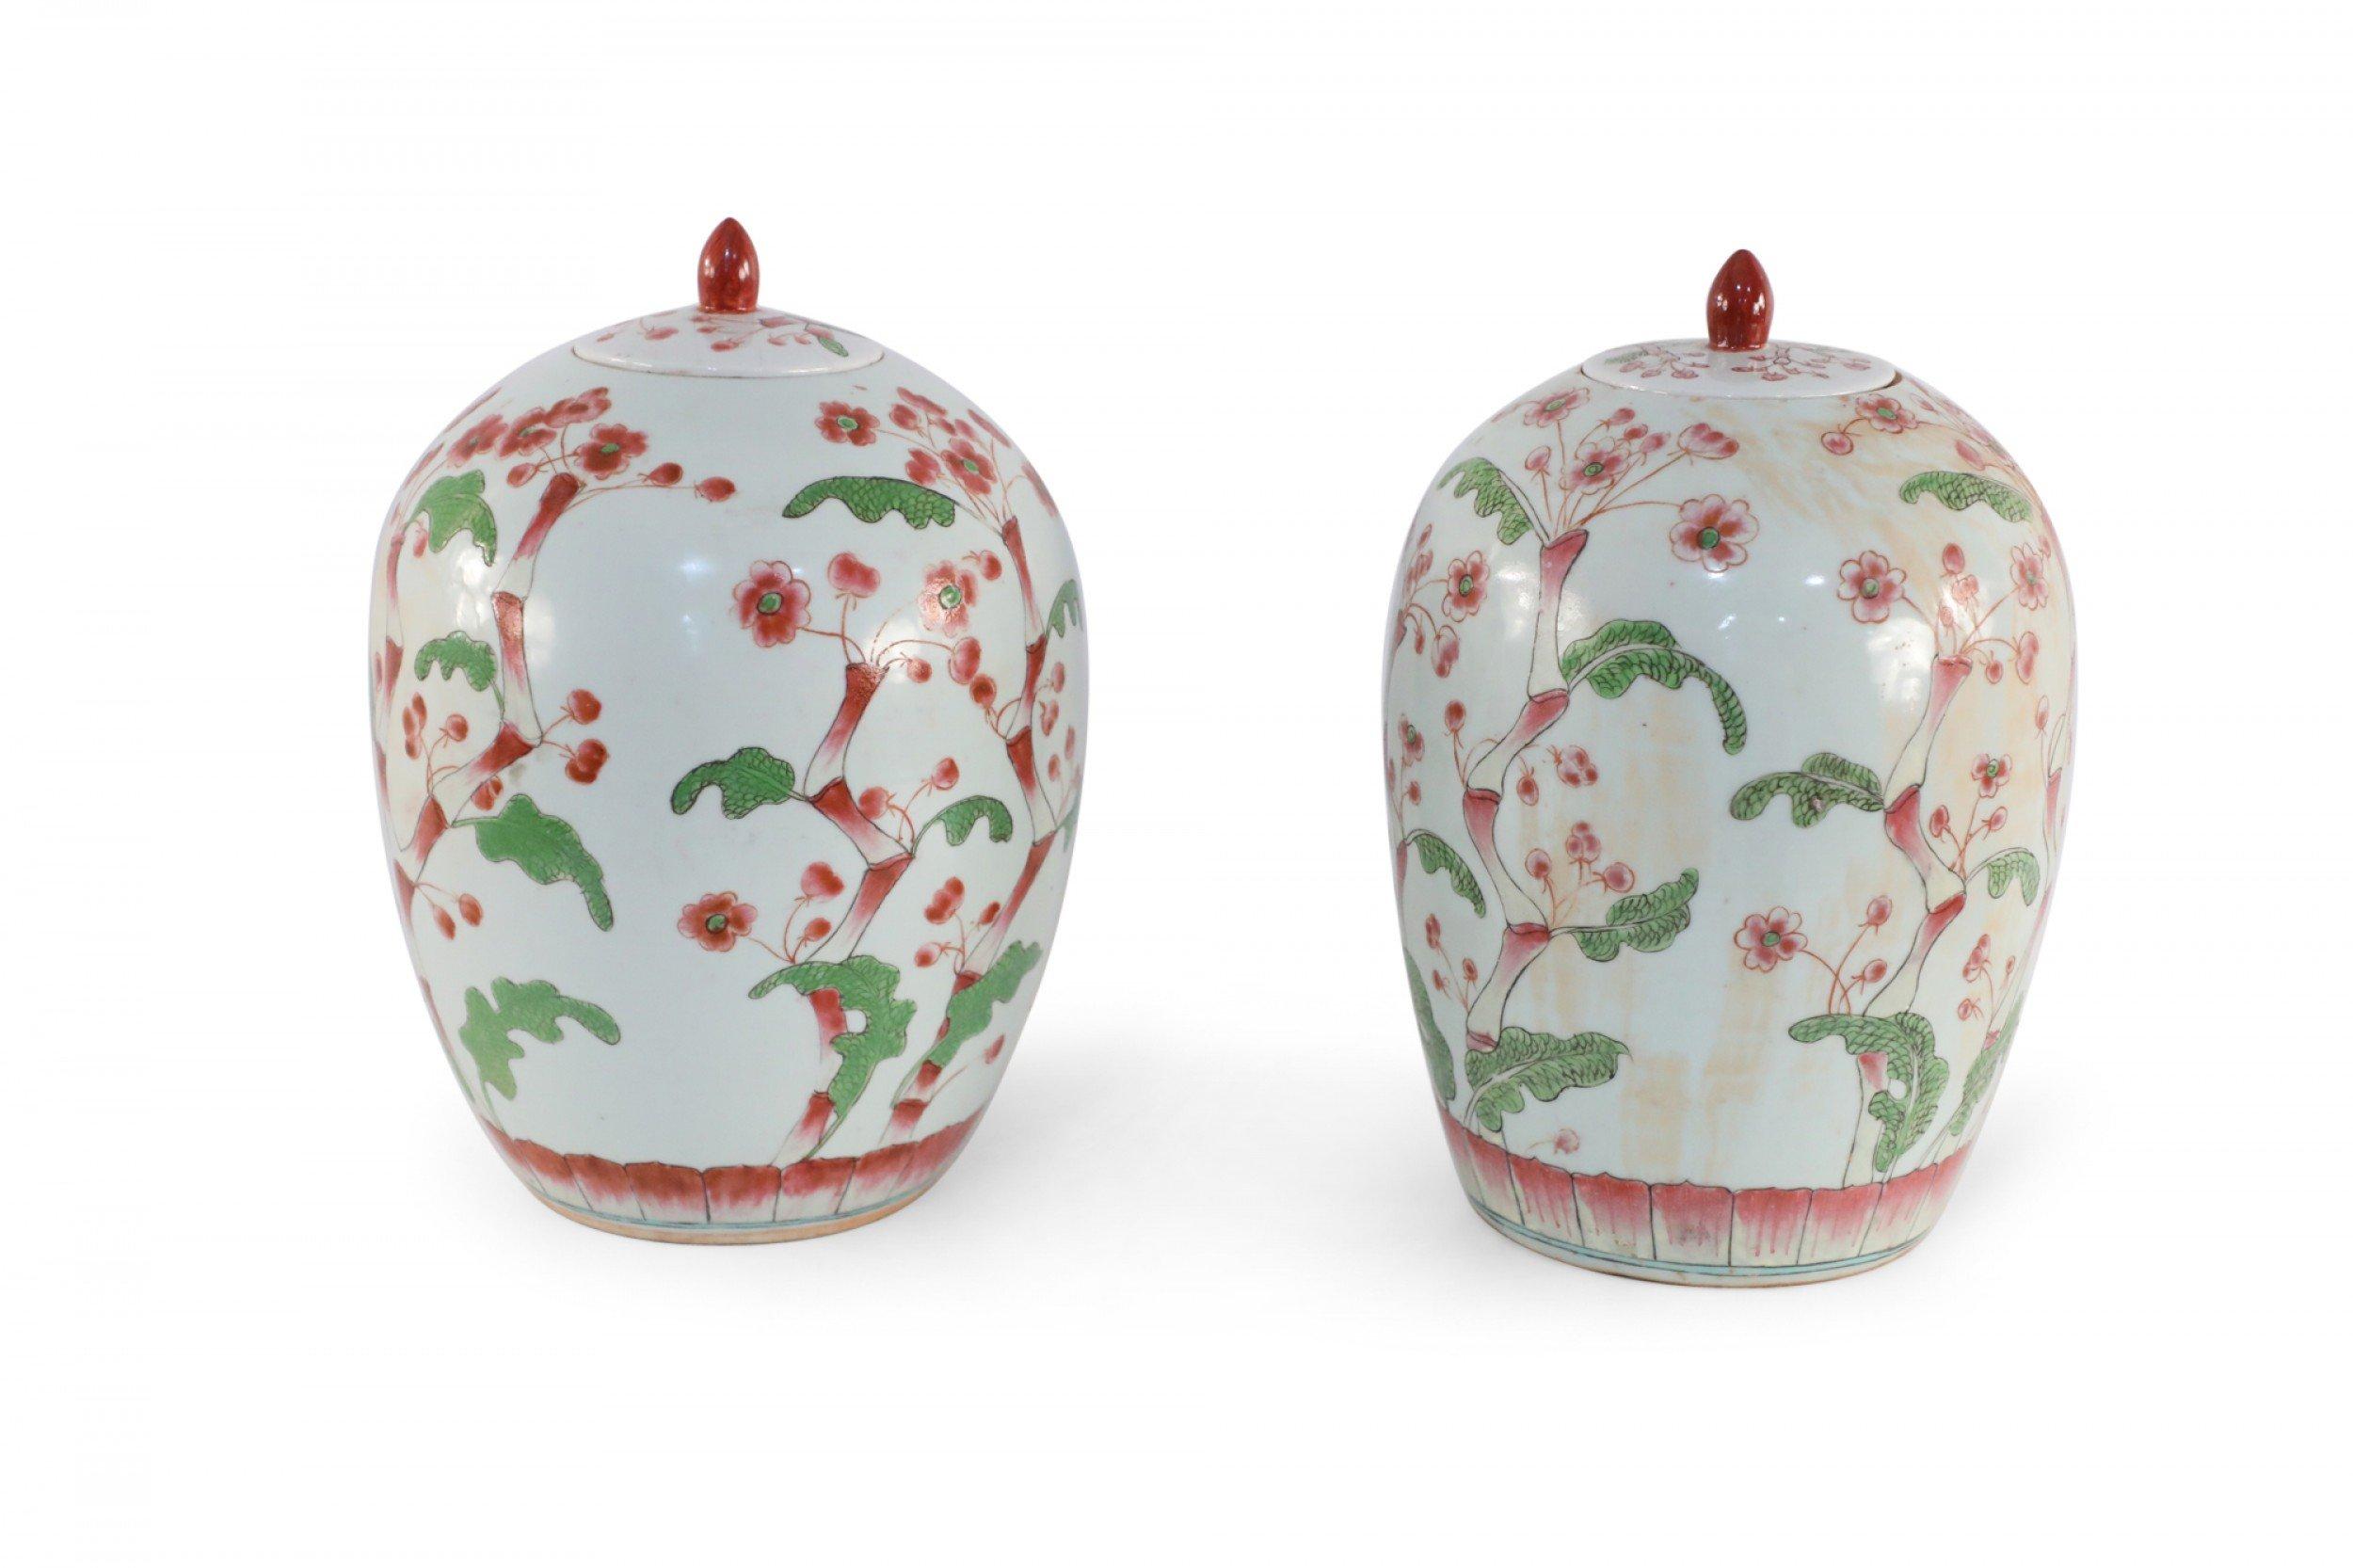 Pair of Chinese White and Pink Cherry Blossom Motif Lidded Porcelain Urns For Sale 4